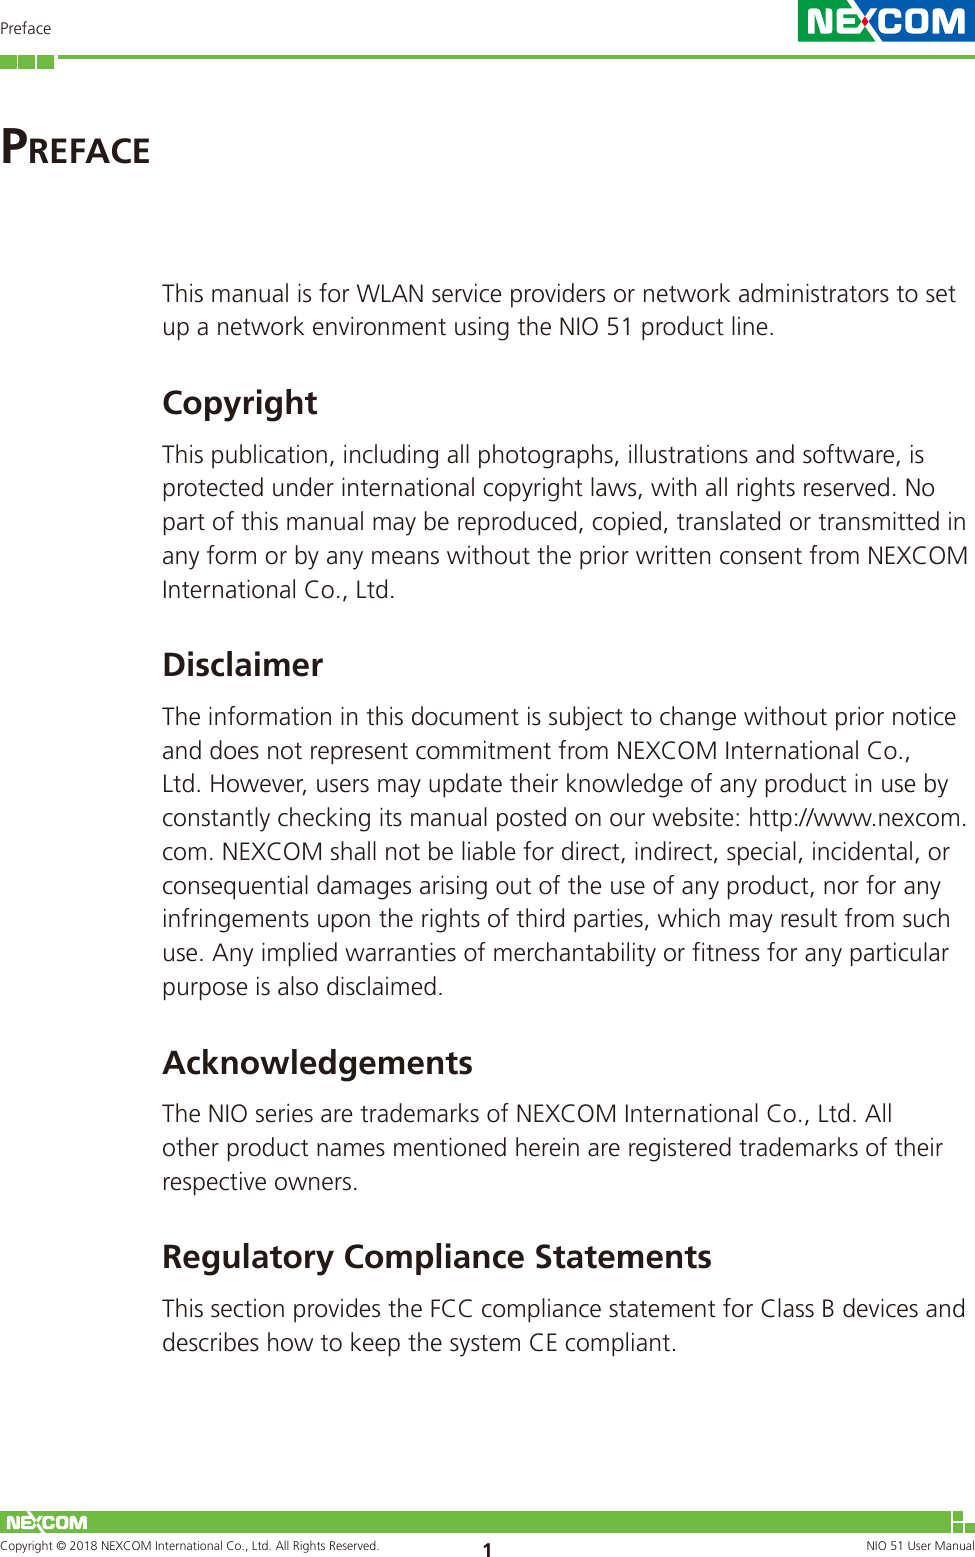 Copyright © 2018 NEXCOM International Co., Ltd. All Rights Reserved. NIO 51 User Manual 1PrefaceThis manual is for WLAN service providers or network administrators to set up a network environment using the NIO 51 product line.CopyrightThis publication, including all photographs, illustrations and software, is protected under international copyright laws, with all rights reserved. No part of this manual may be reproduced, copied, translated or transmitted in any form or by any means without the prior written consent from NEXCOM International Co., Ltd.DisclaimerThe information in this document is subject to change without prior notice and does not represent commitment from NEXCOM International Co., Ltd. However, users may update their knowledge of any product in use by constantly checking its manual posted on our website: http://www.nexcom.com. NEXCOM shall not be liable for direct, indirect, special, incidental, or consequential damages arising out of the use of any product, nor for any infringements upon the rights of third parties, which may result from such use. Any implied warranties of merchantability or fitness for any particular purpose is also disclaimed.AcknowledgementsThe NIO series are trademarks of NEXCOM International Co., Ltd. All other product names mentioned herein are registered trademarks of their respective owners.Regulatory Compliance StatementsThis section provides the FCC compliance statement for Class B devices and describes how to keep the system CE compliant.PrefaCe